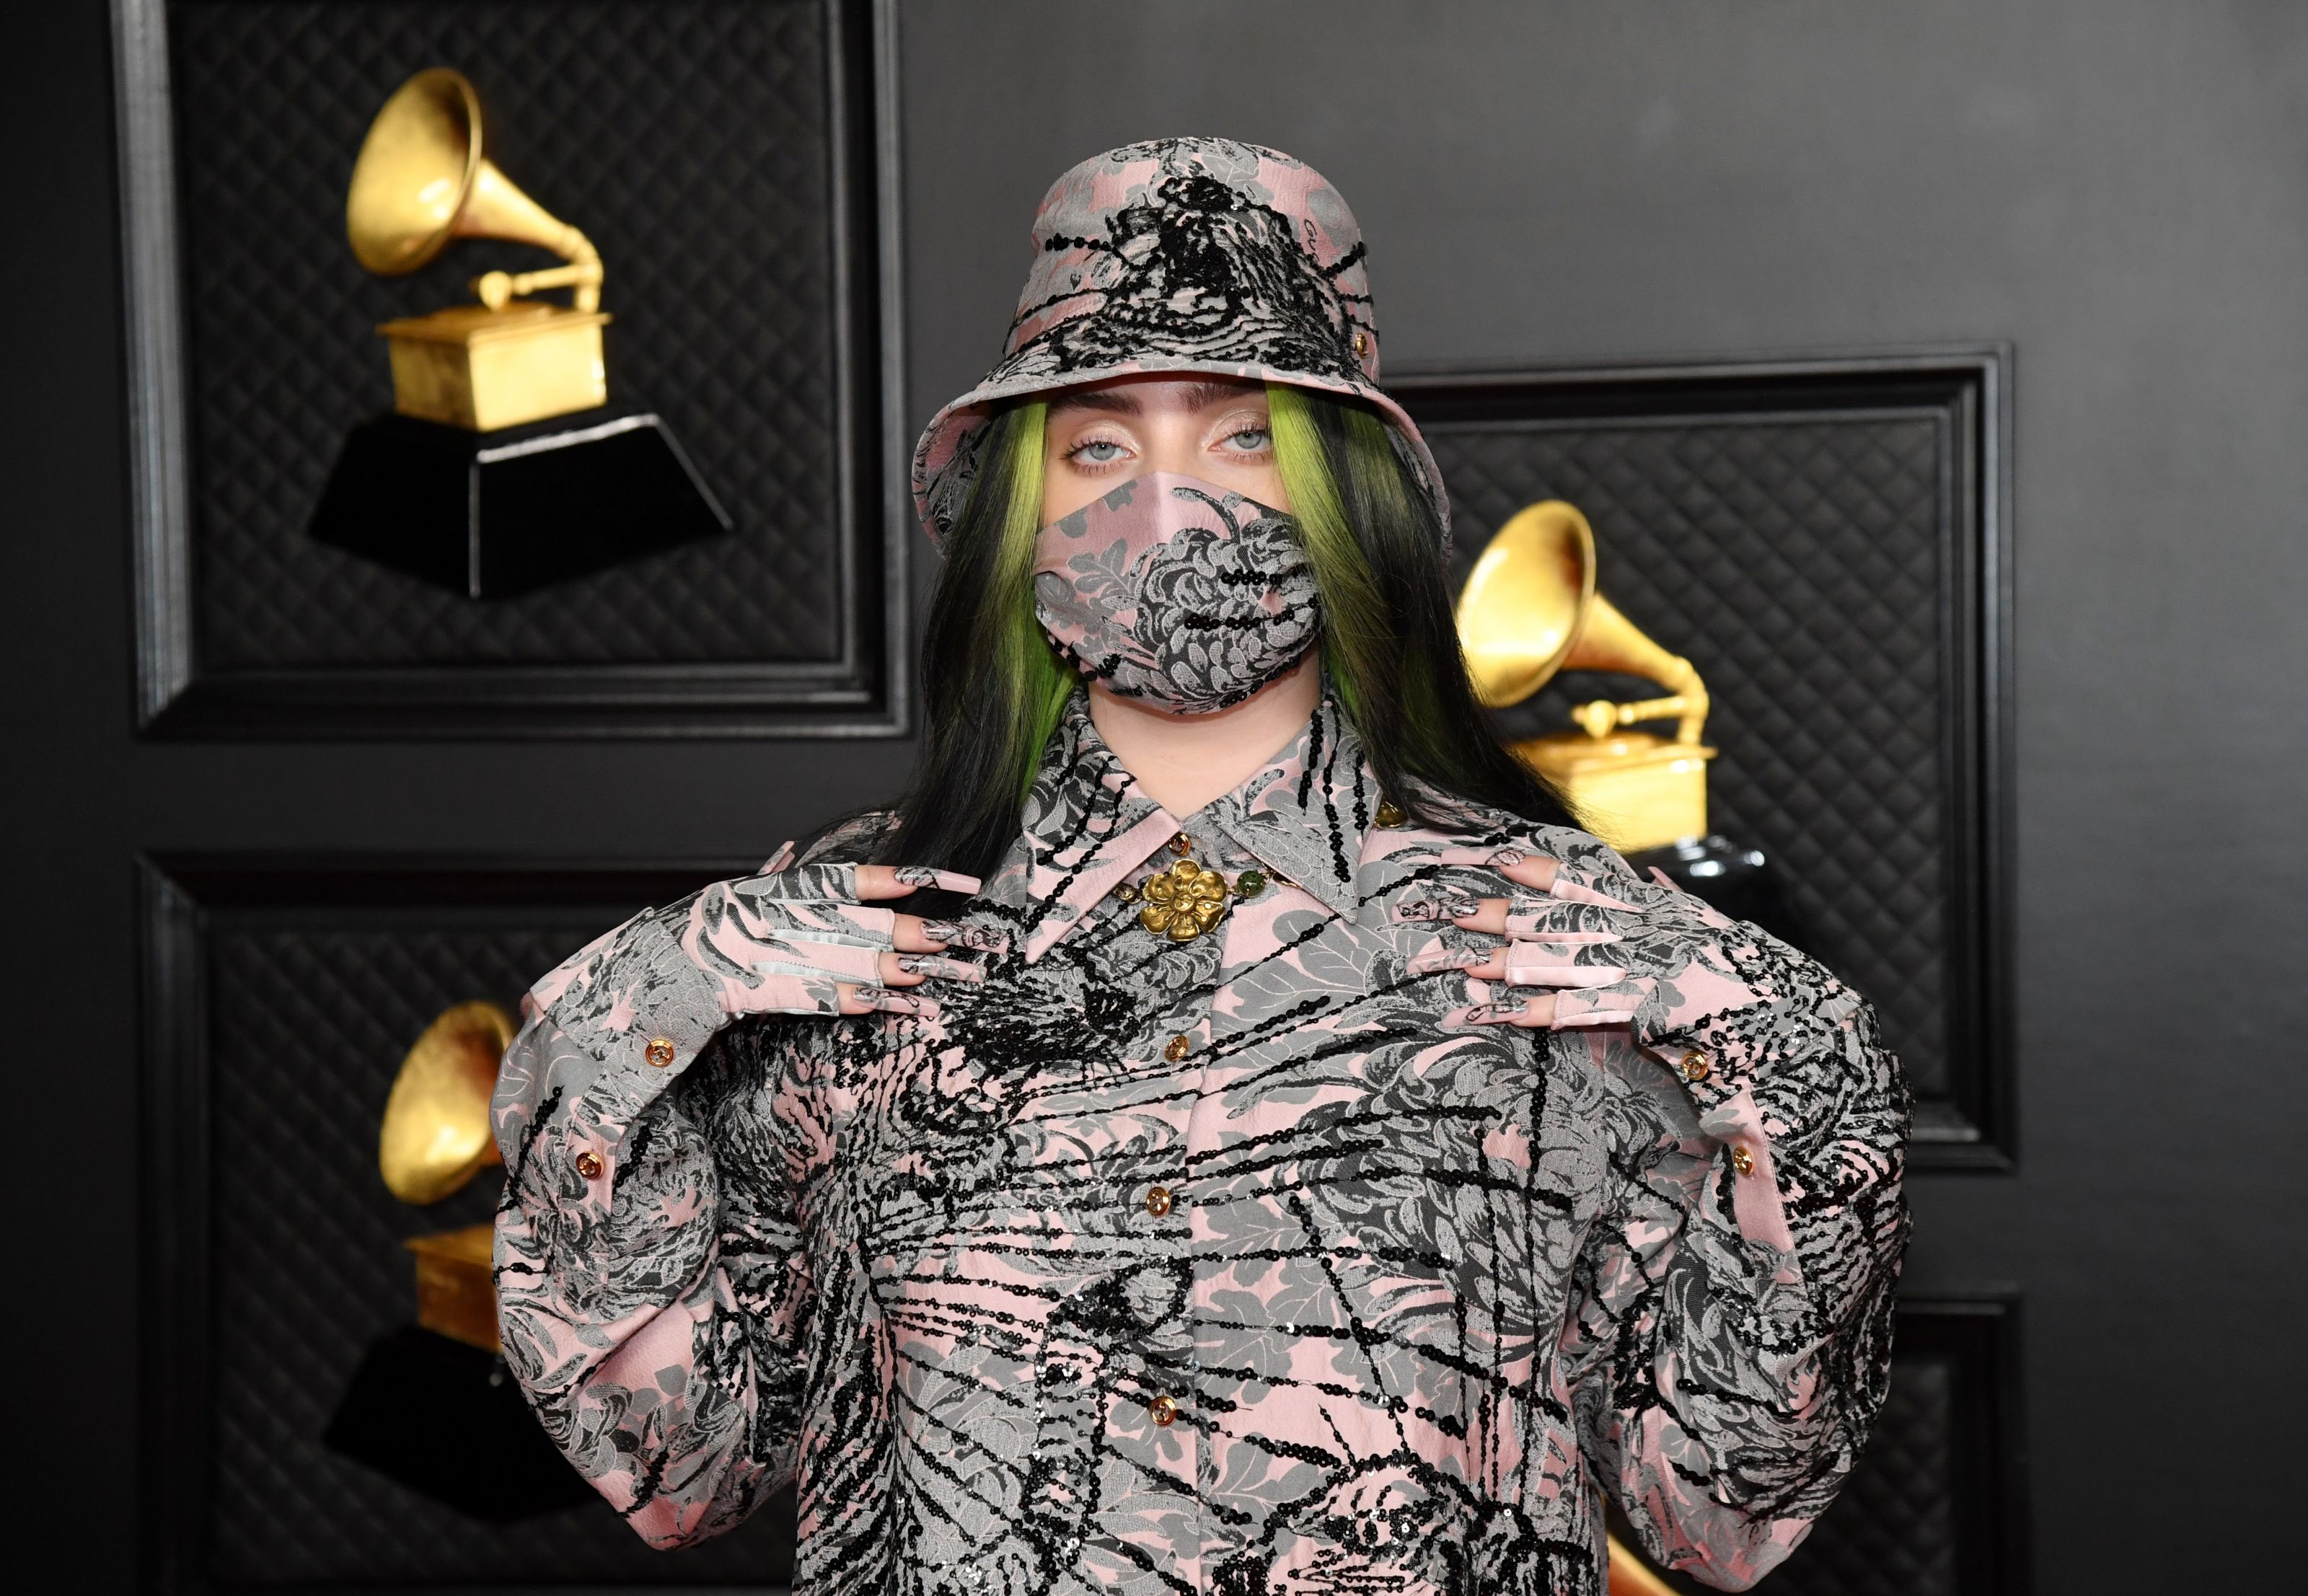 Grammys: Billie Eilish snags trophy for Record of the Year